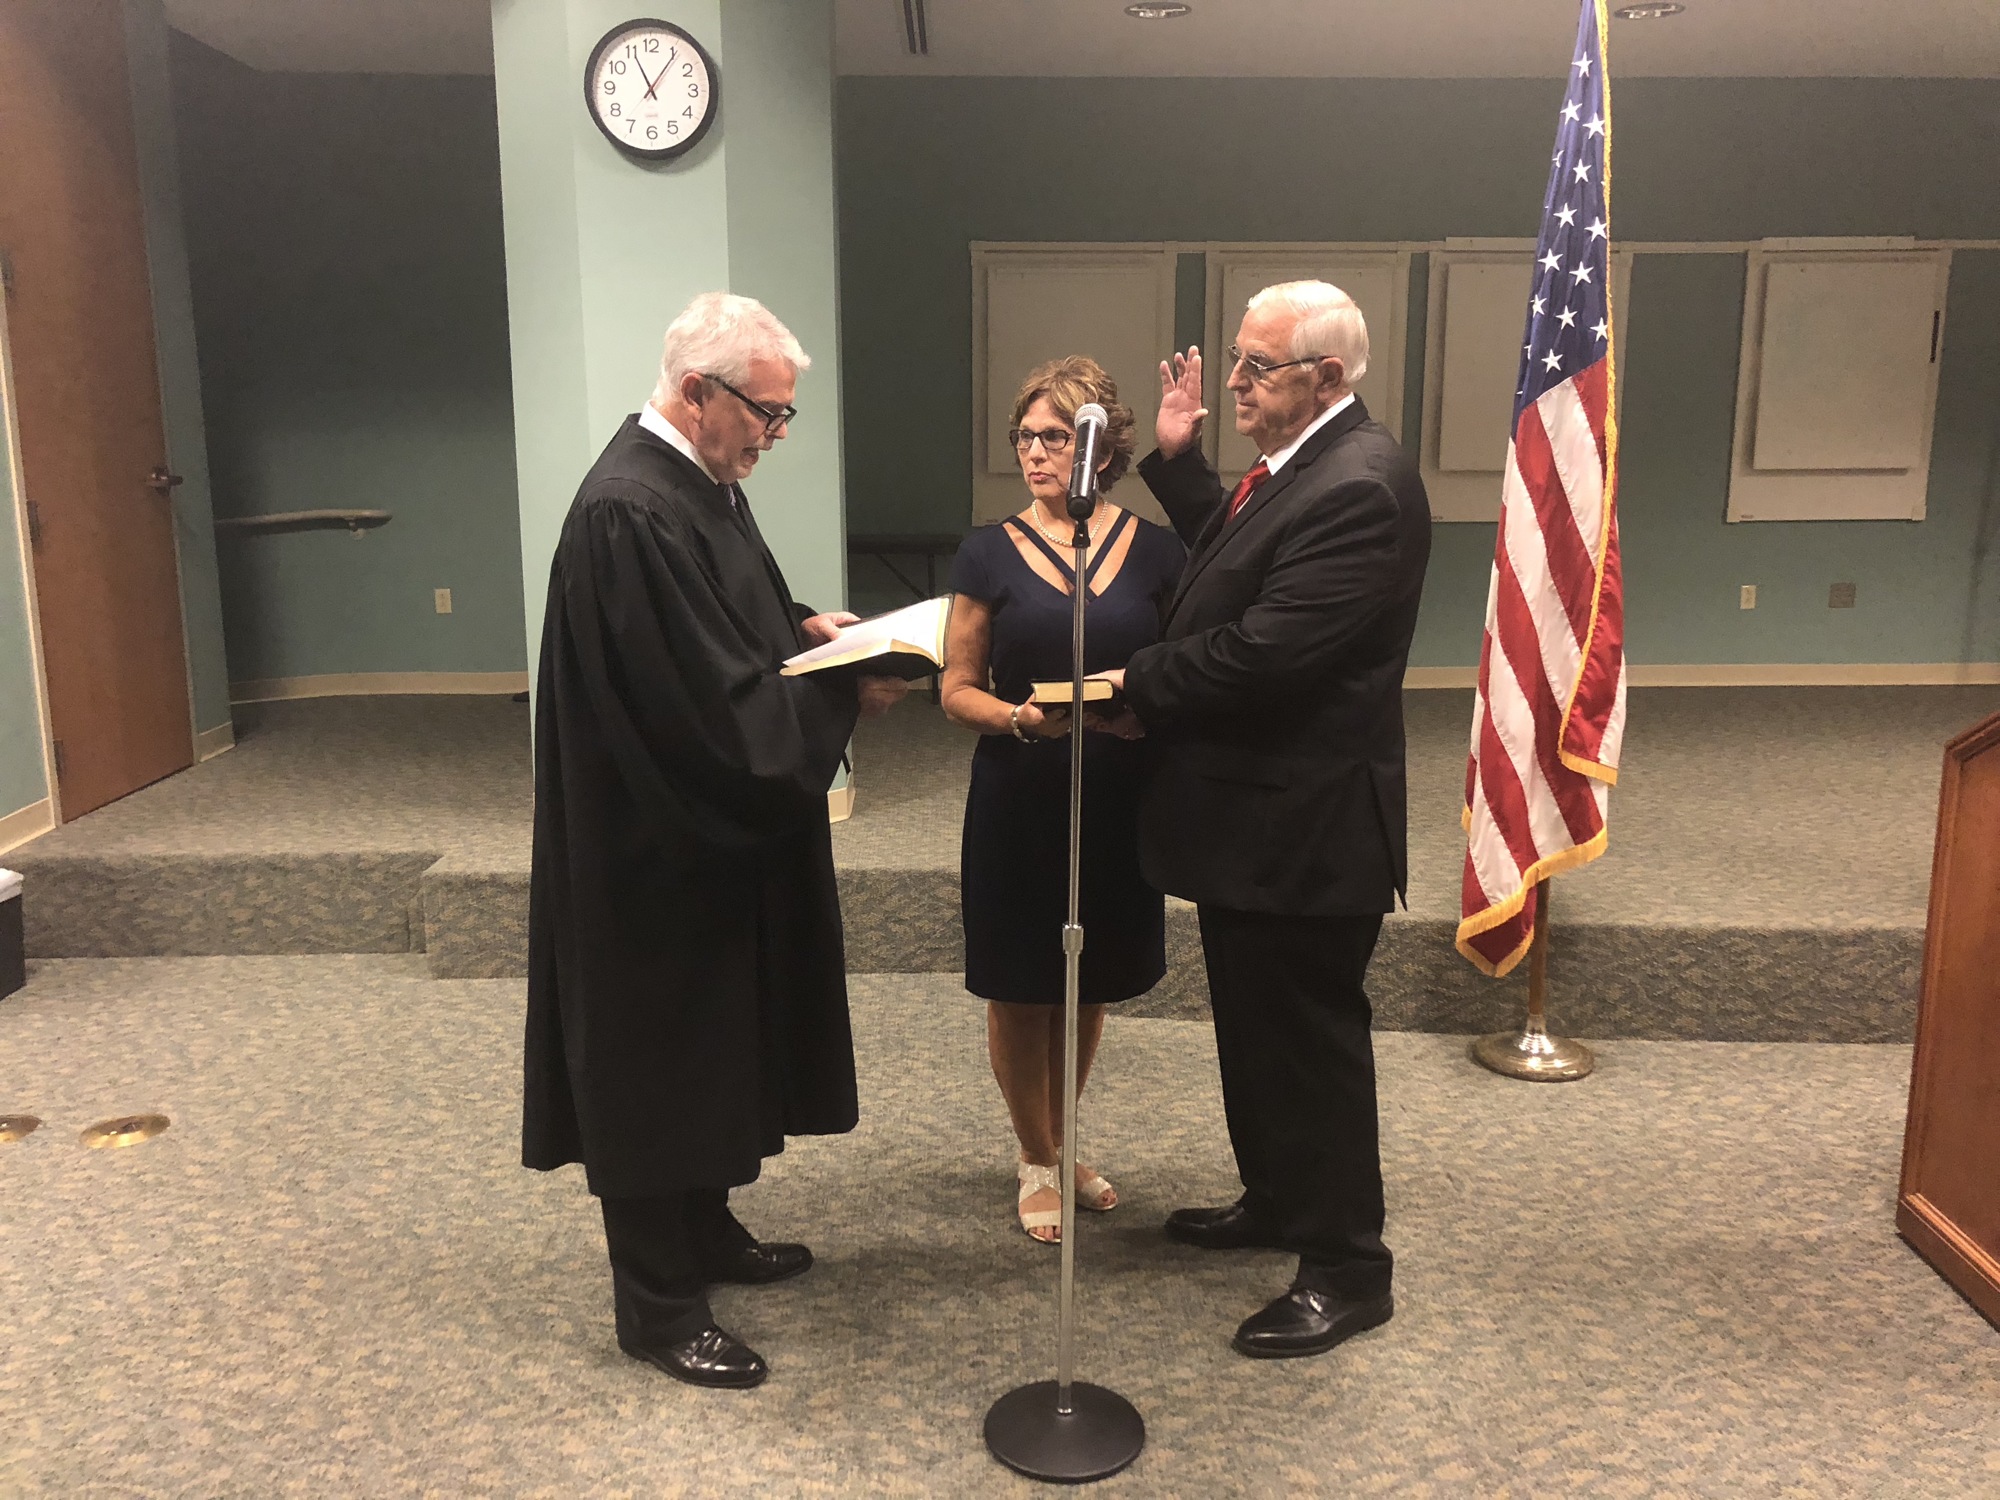 Photo by David Cawton Fourth Judicial Circuit Chief Judge Mark Mahon swears in new District 12 City Council member Randy White on Wednesday. At White’s side is his wife, Julie.